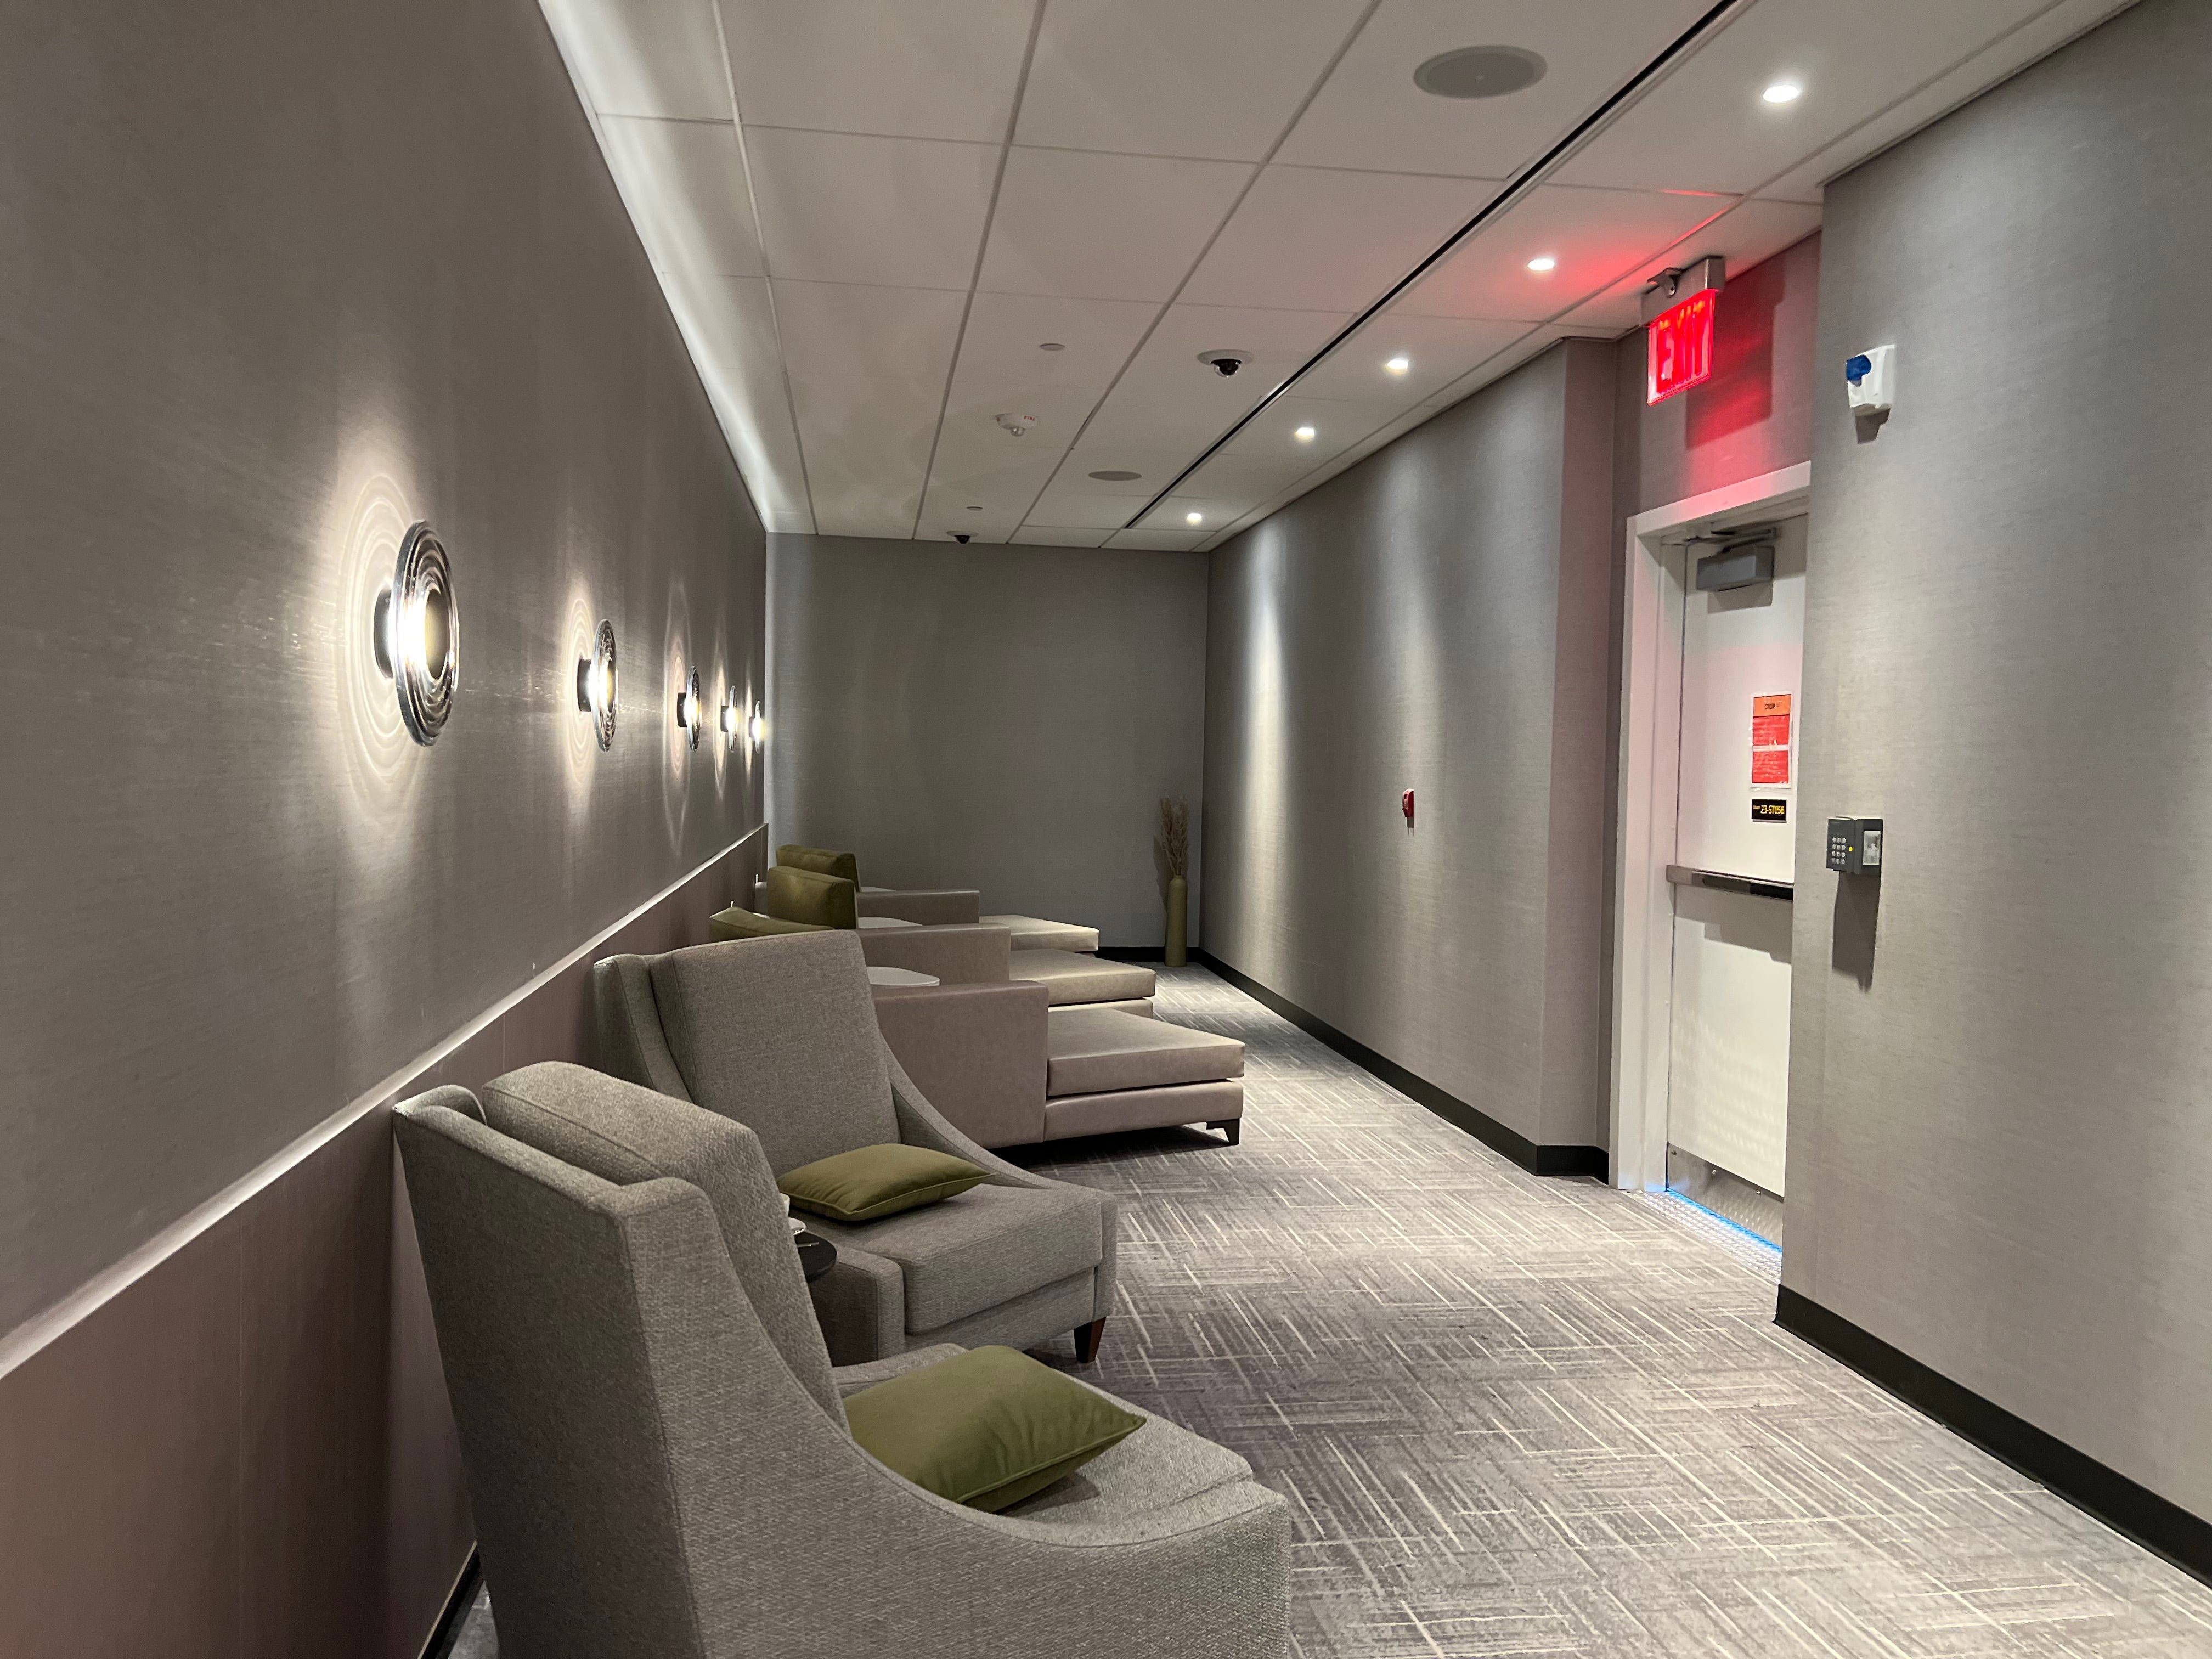 American and British Airways' co-branded Chelsea Lounge.